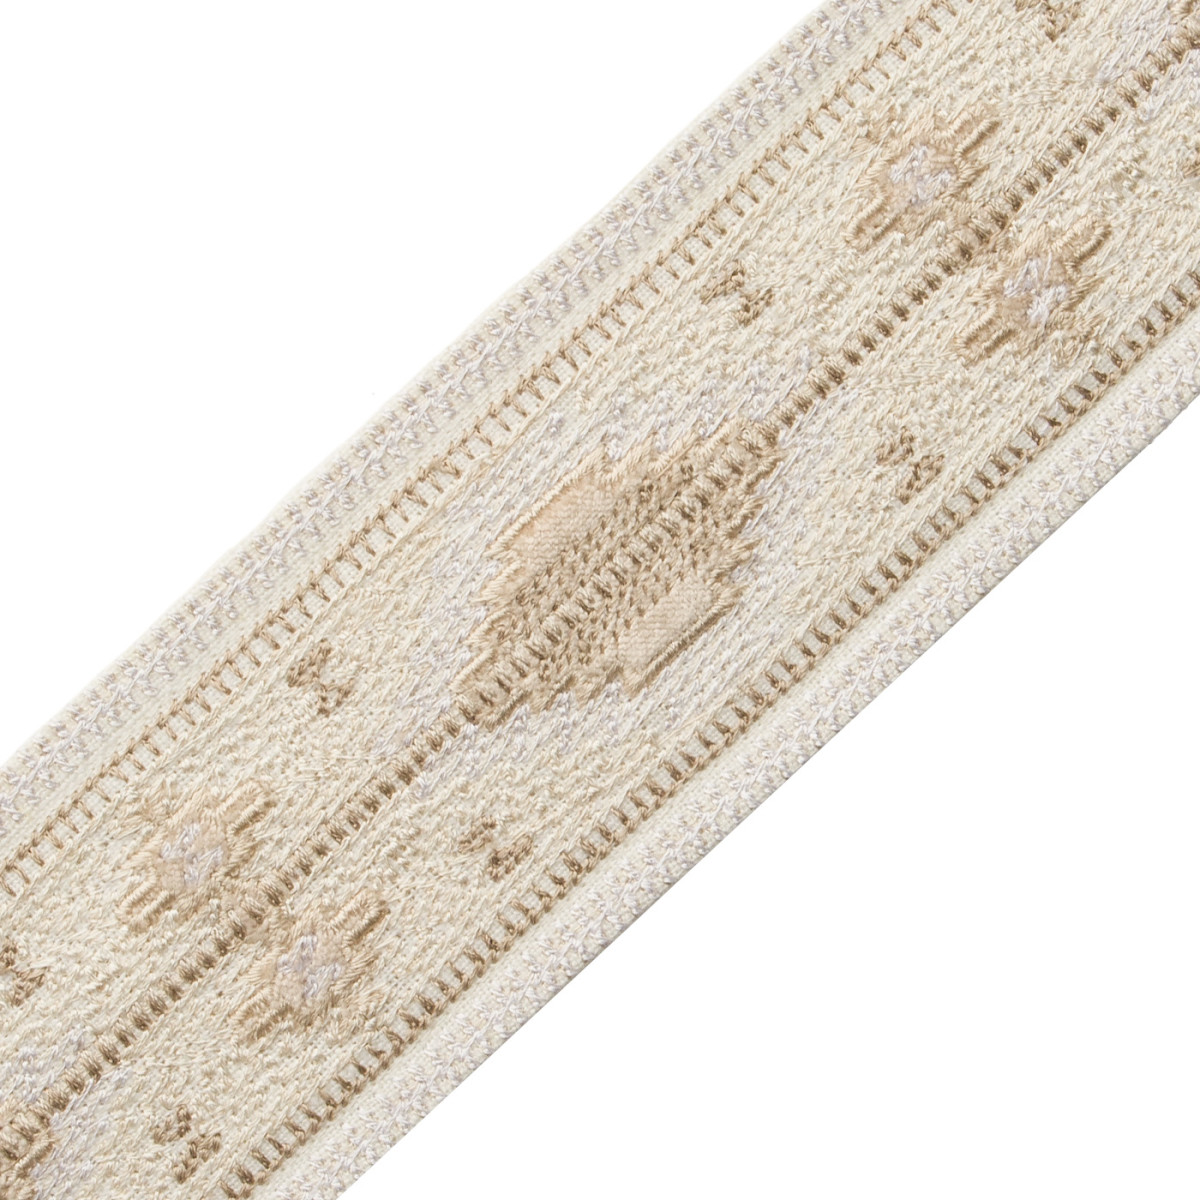 SEDONA EMBROIDERED BORDER - WHITE SANDS - Samuel and Sons